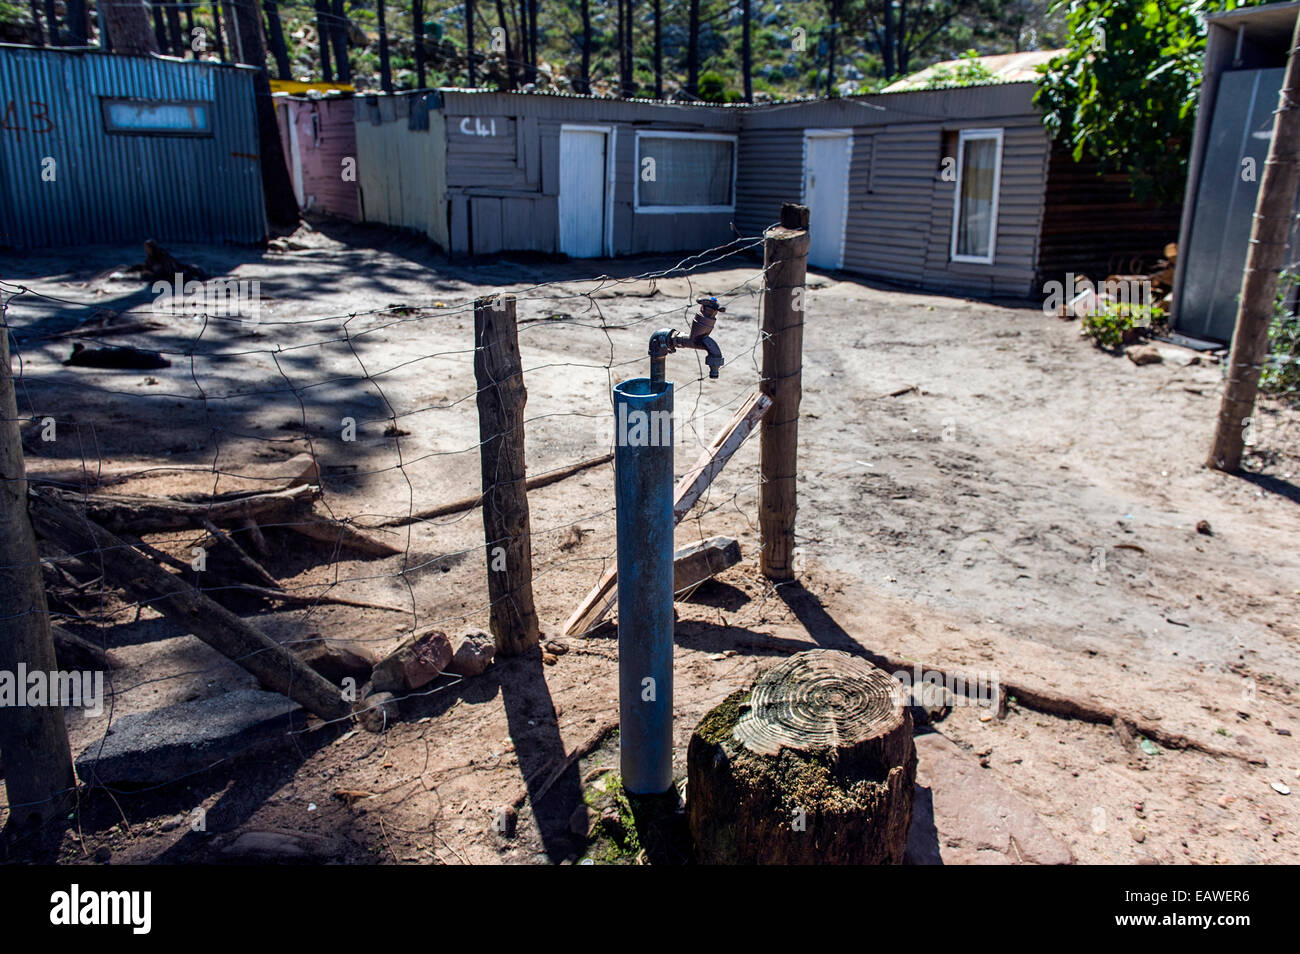 Township homes made of scrap metal and a communal water supply tap. Stock Photo